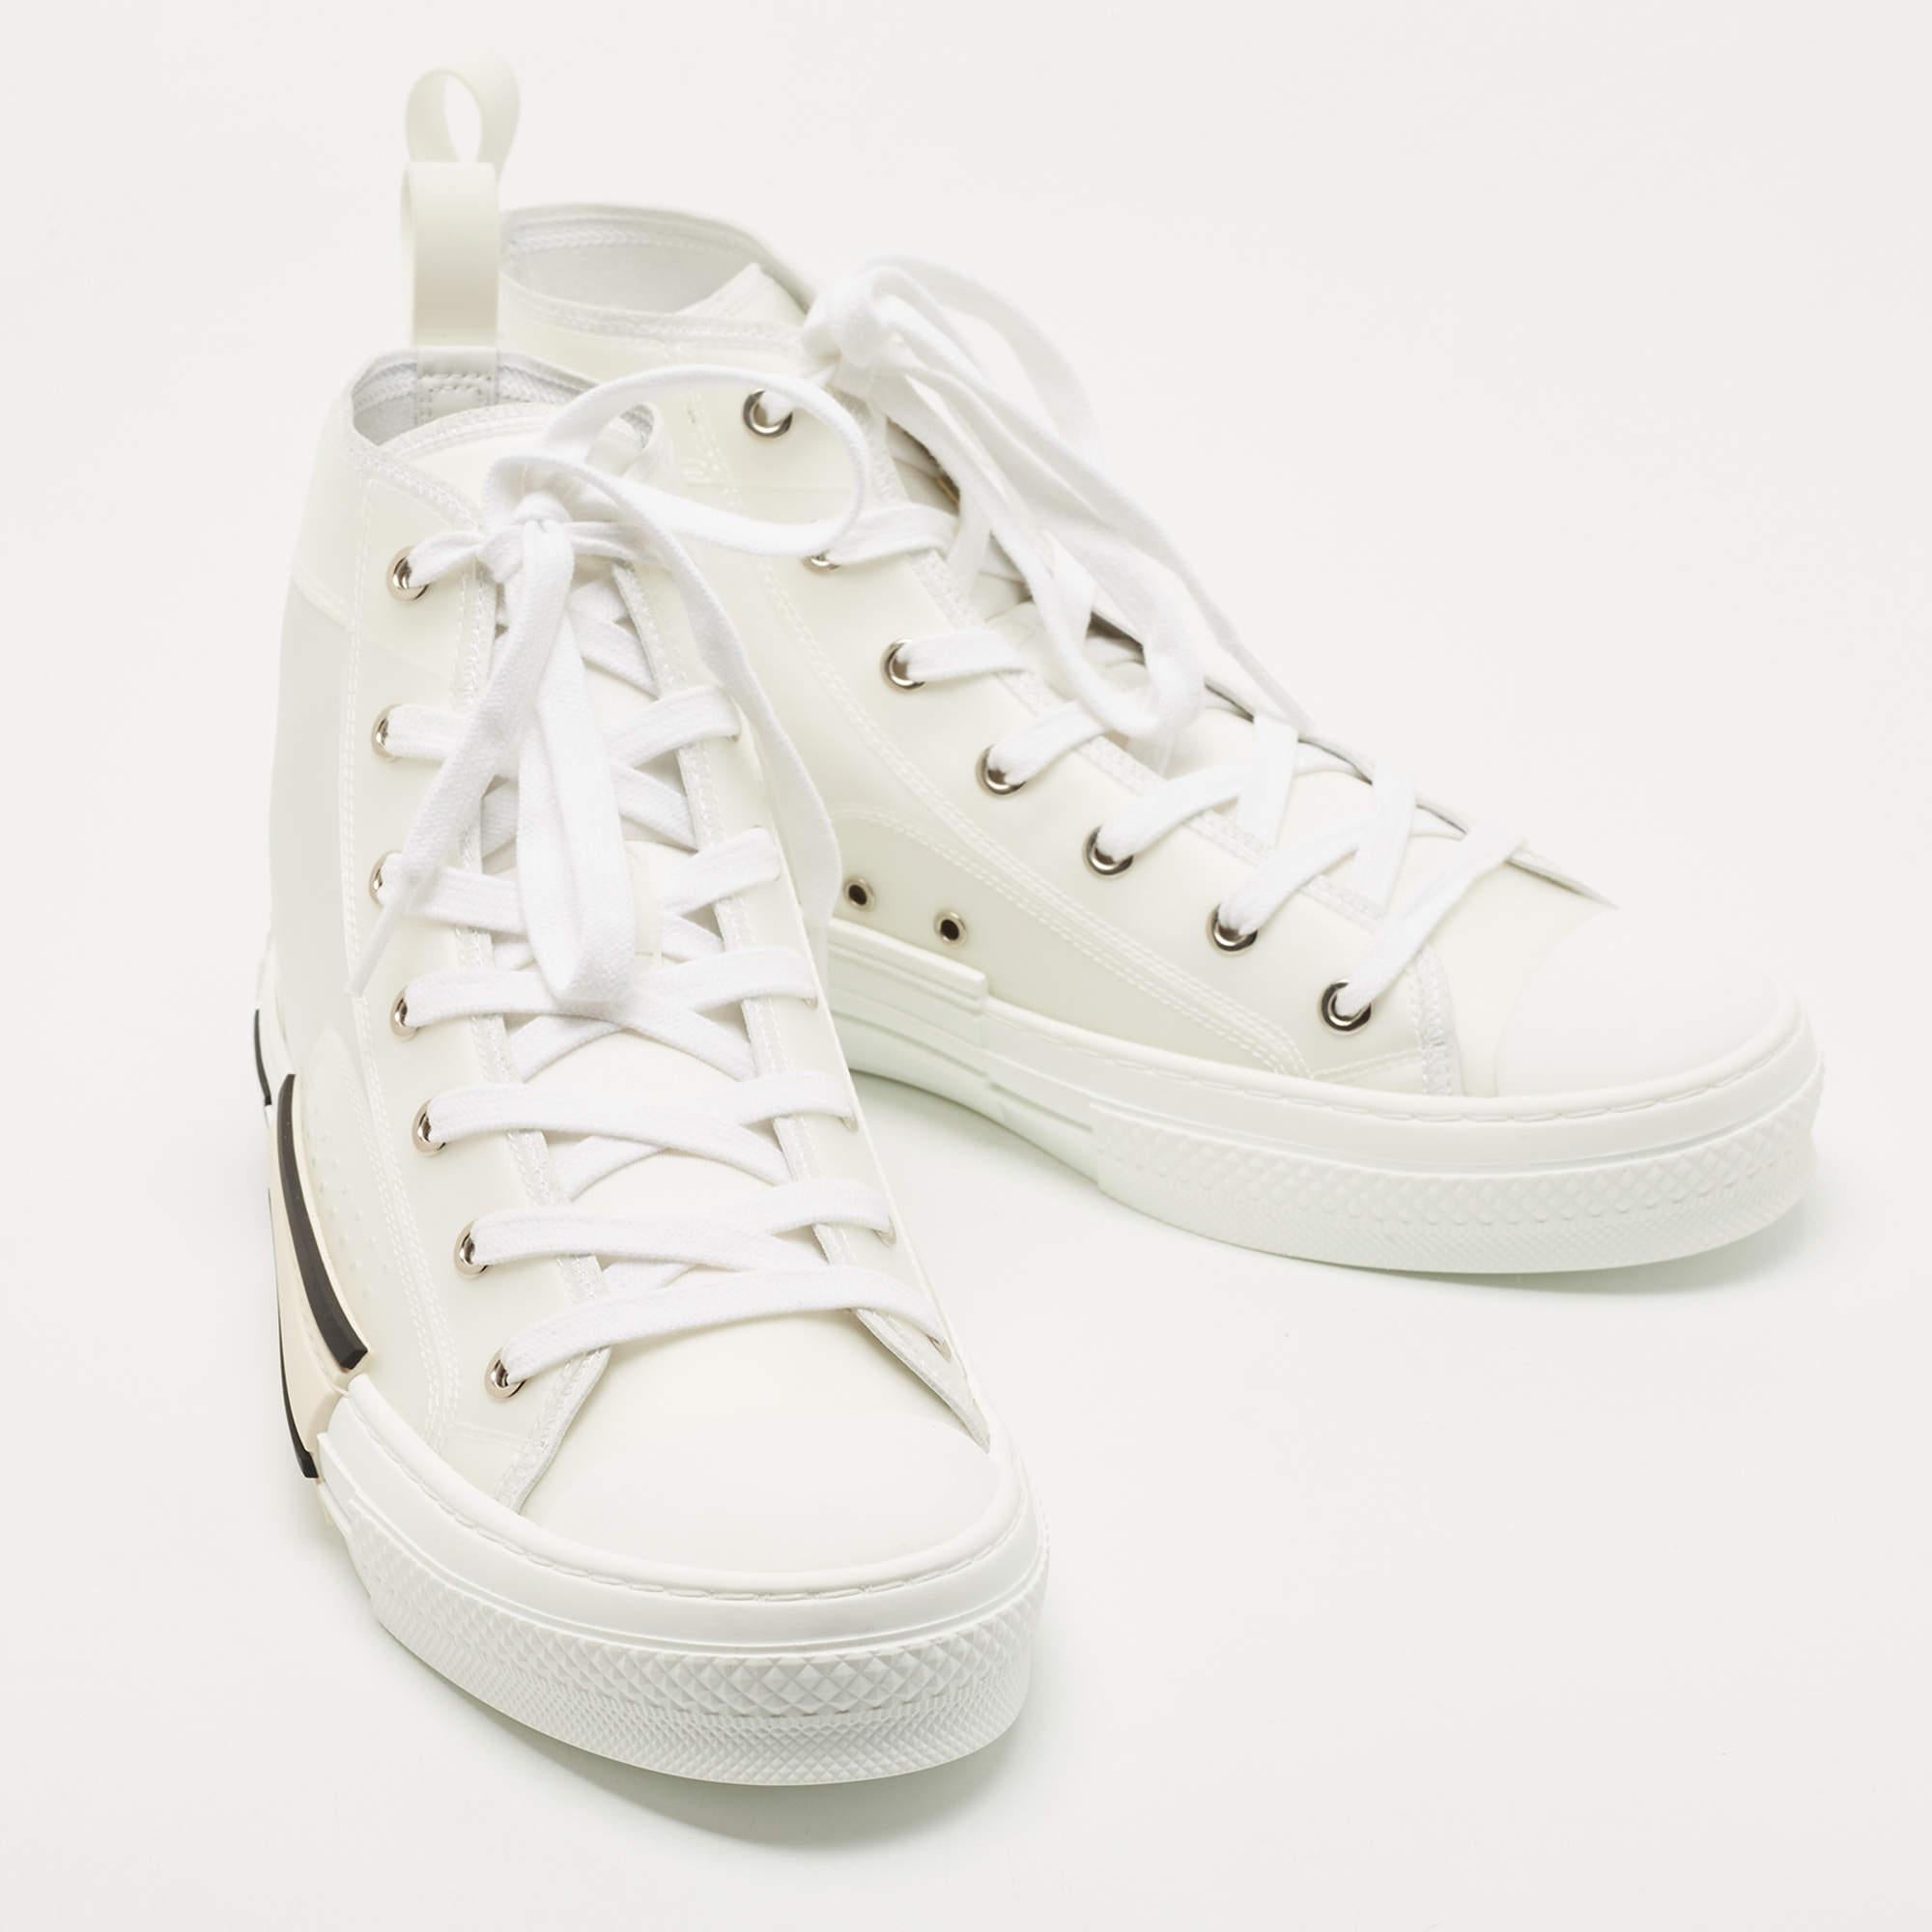 Dior White Canvas and PVC B23 High Top Sneakers Size 42 1